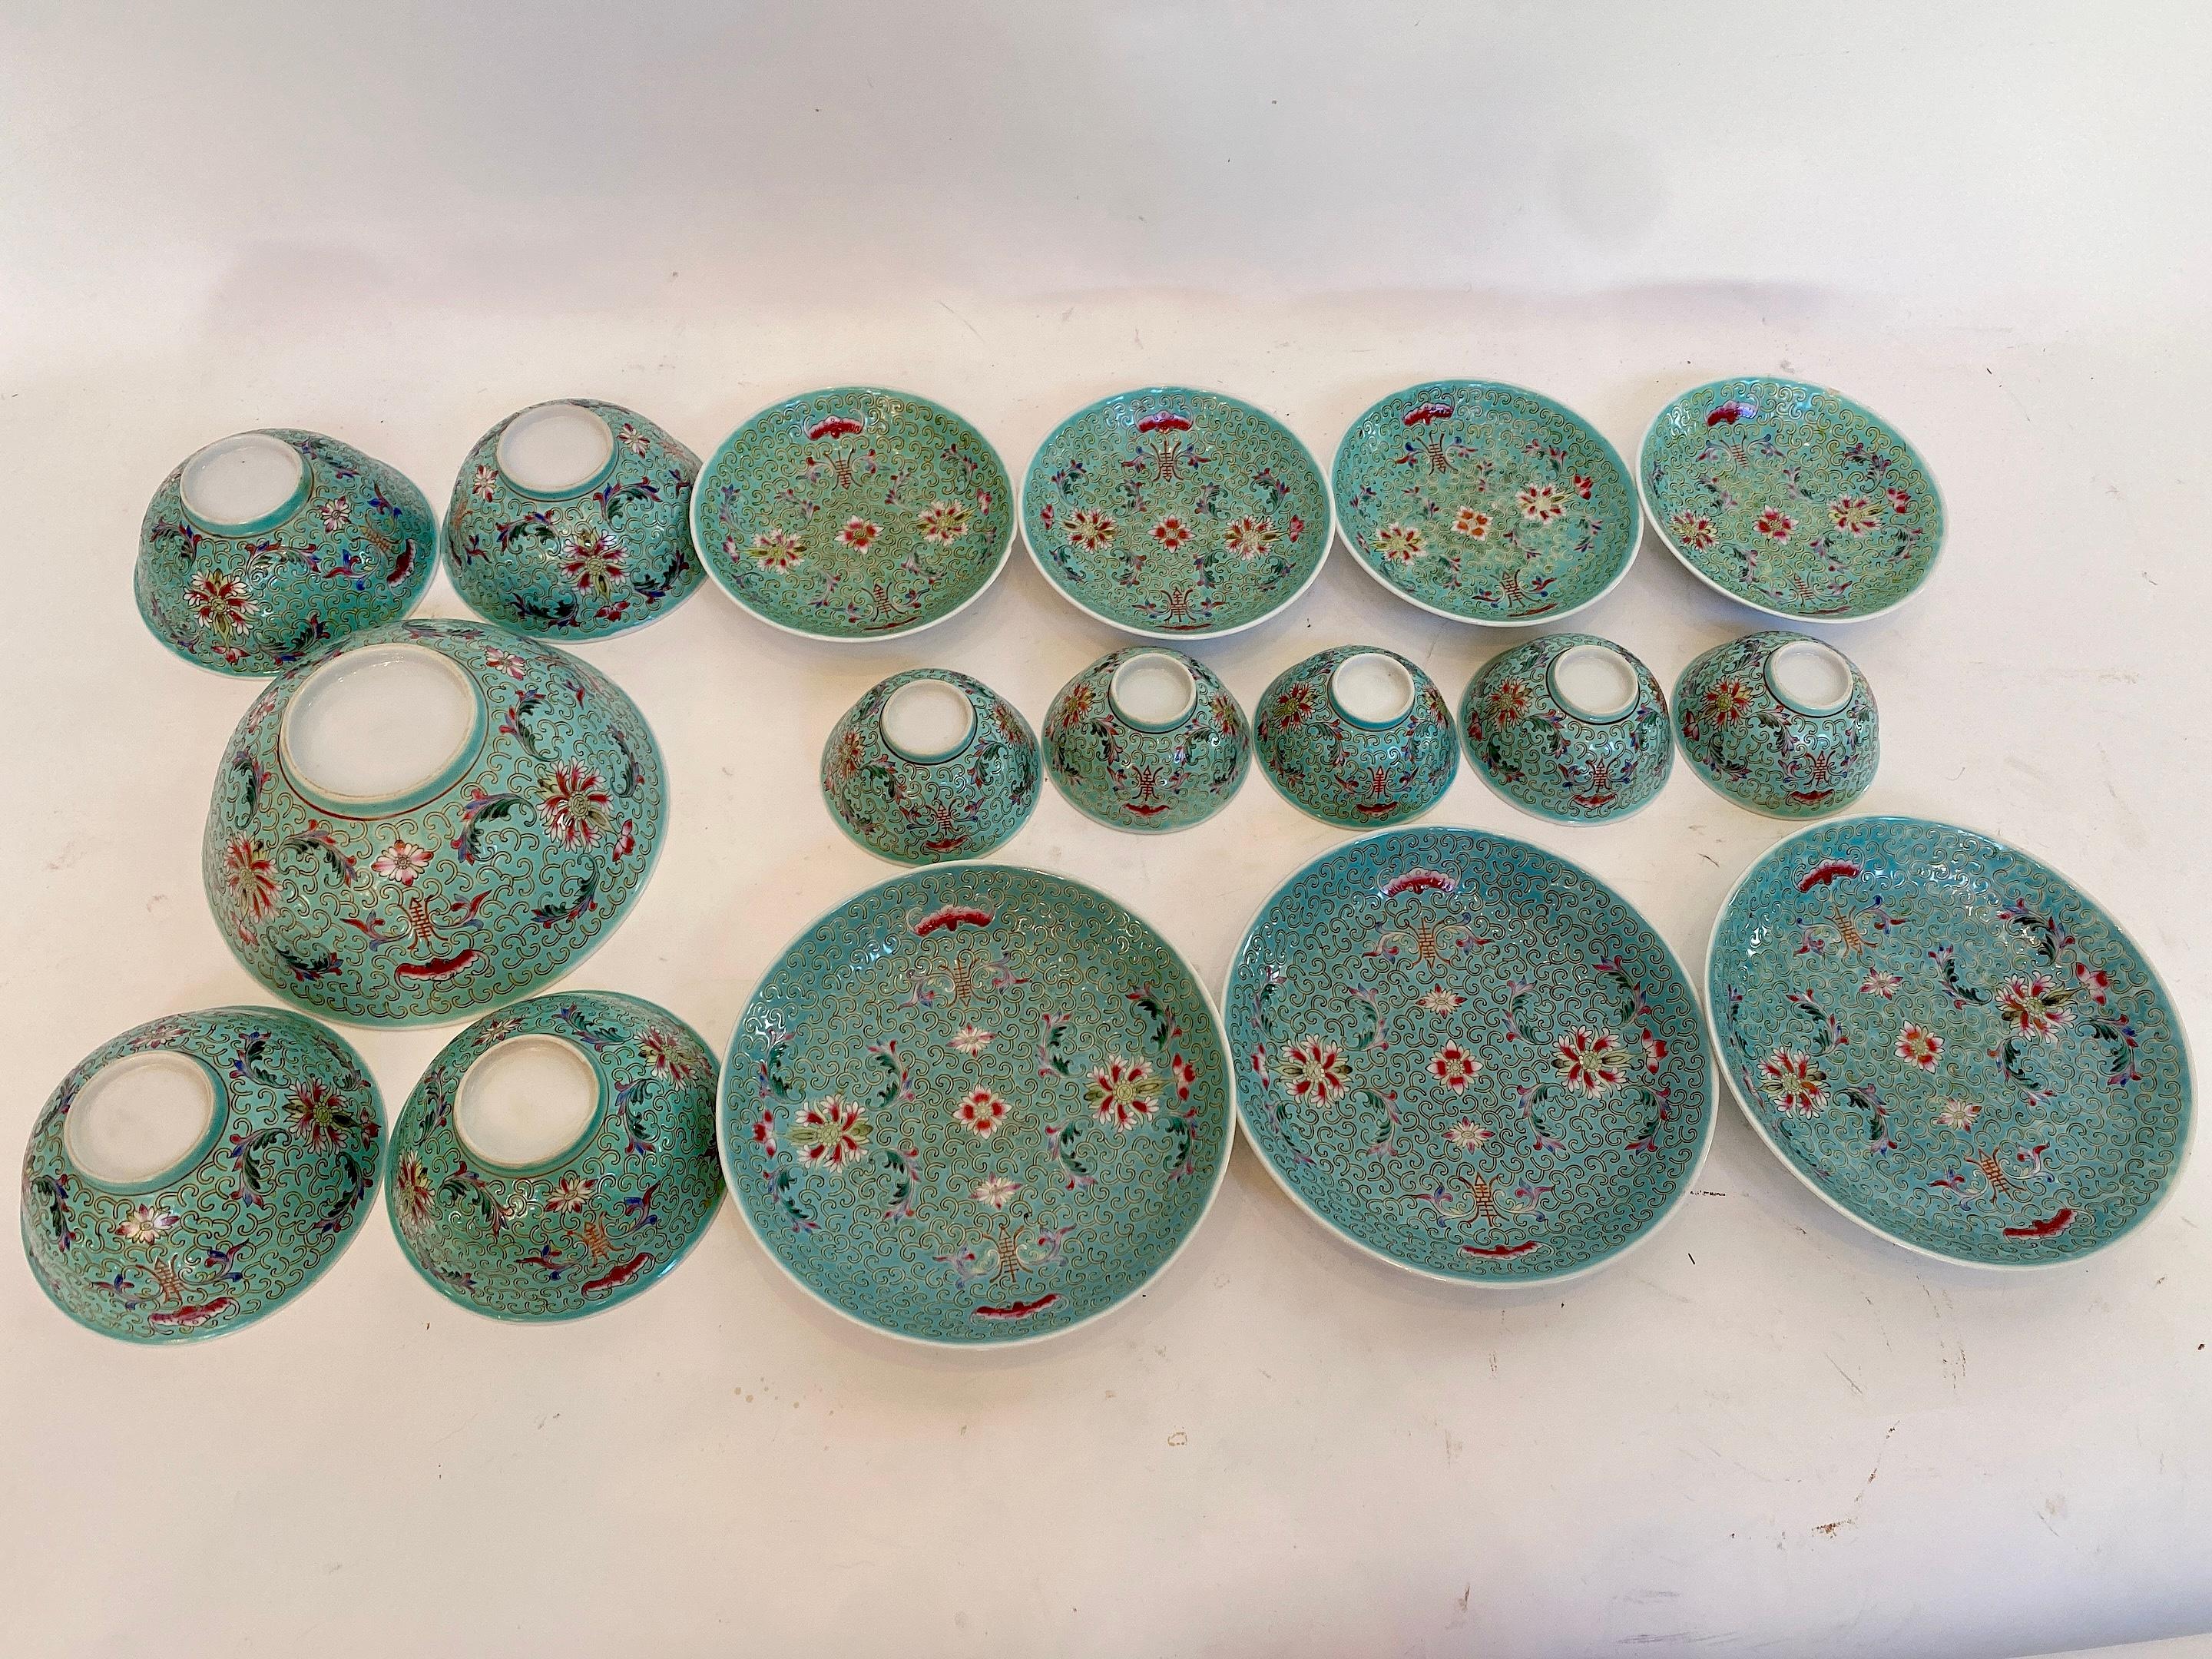 Antique Chinese famille rose porcelain 17 pieces set, hand painted, measures: 11.5” x 11.5 x 4 '' see carefully more pictures. 4 bowls 5'' x 2.25'', 3 plates 7.5'' x 1.5'', 4 small plates( 1 has hairline and small chip, another two have a small